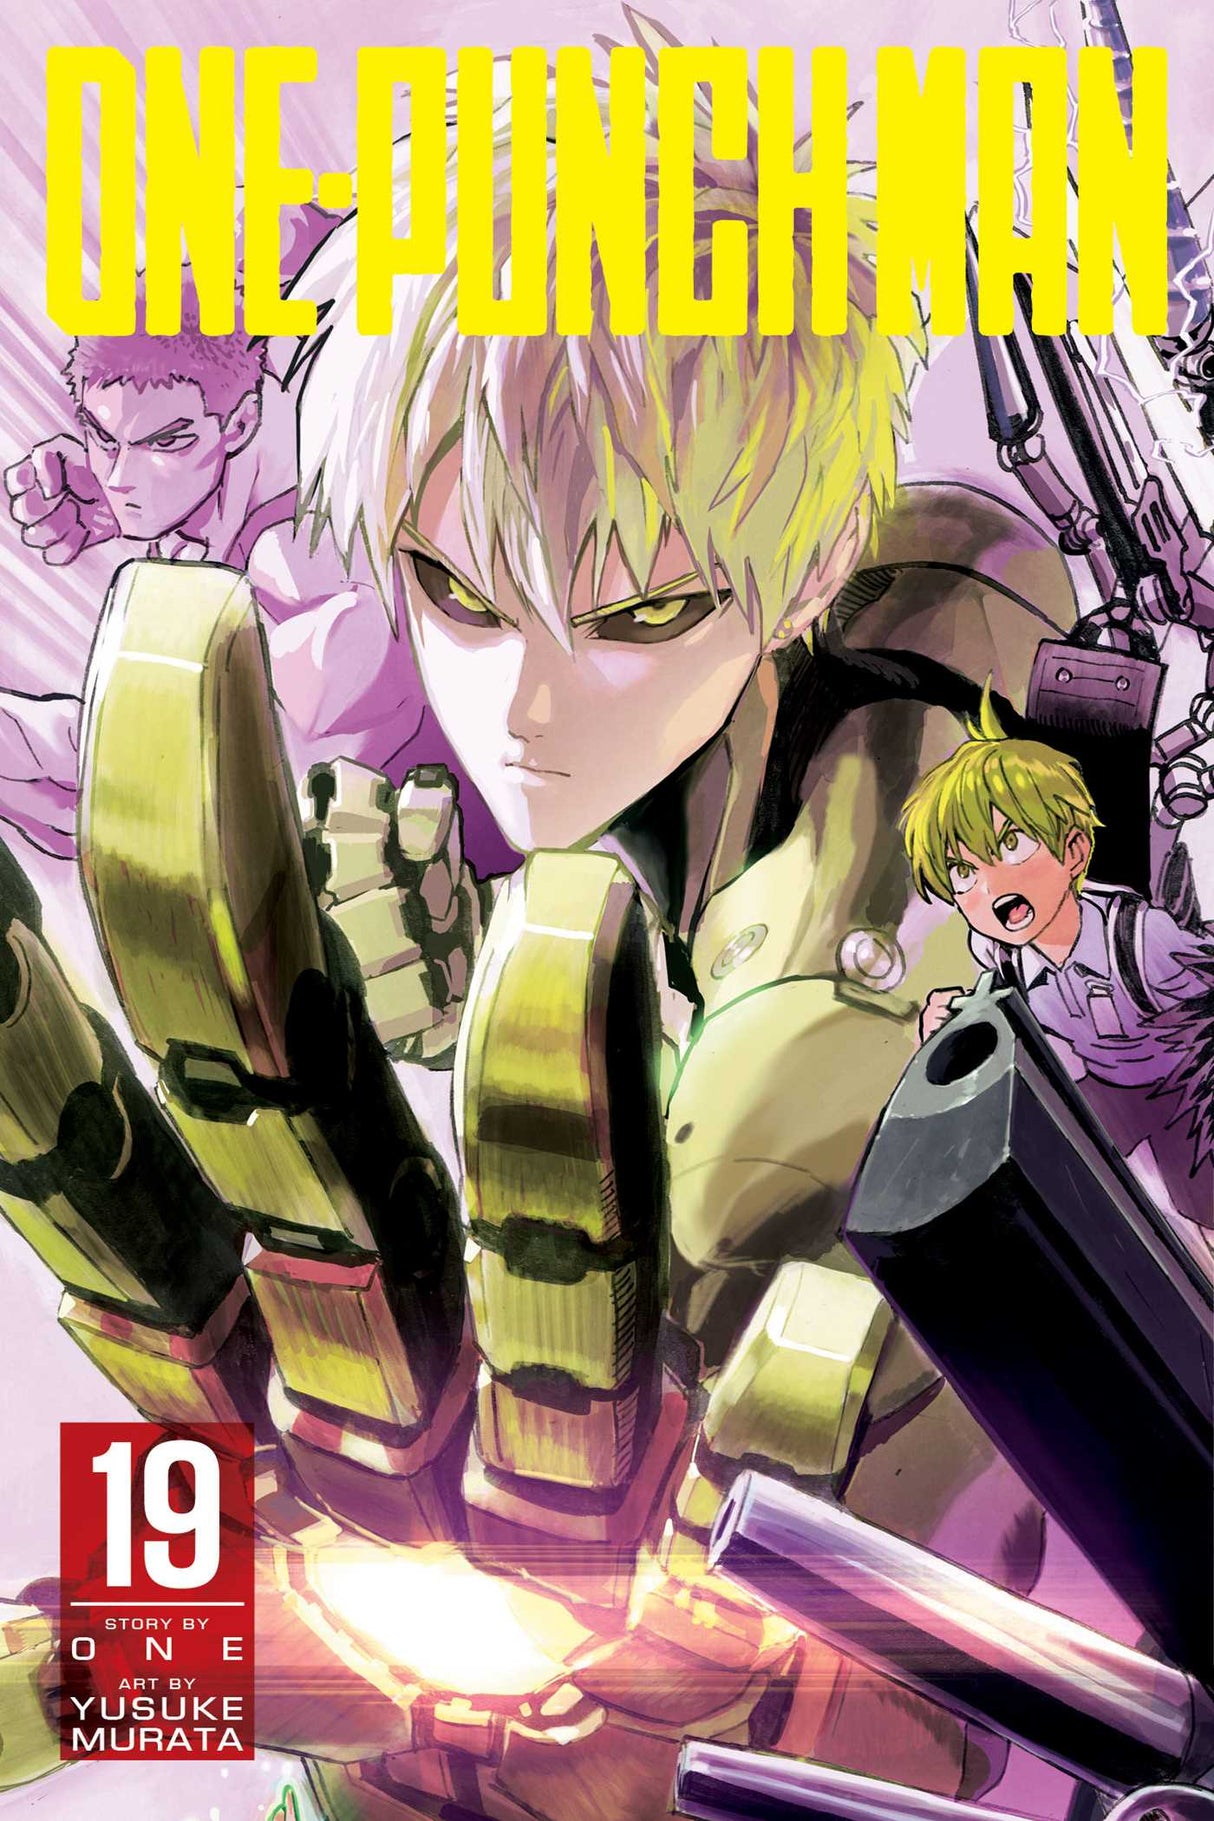 Cover image of the Manga One-Punch-Man-Vol-19